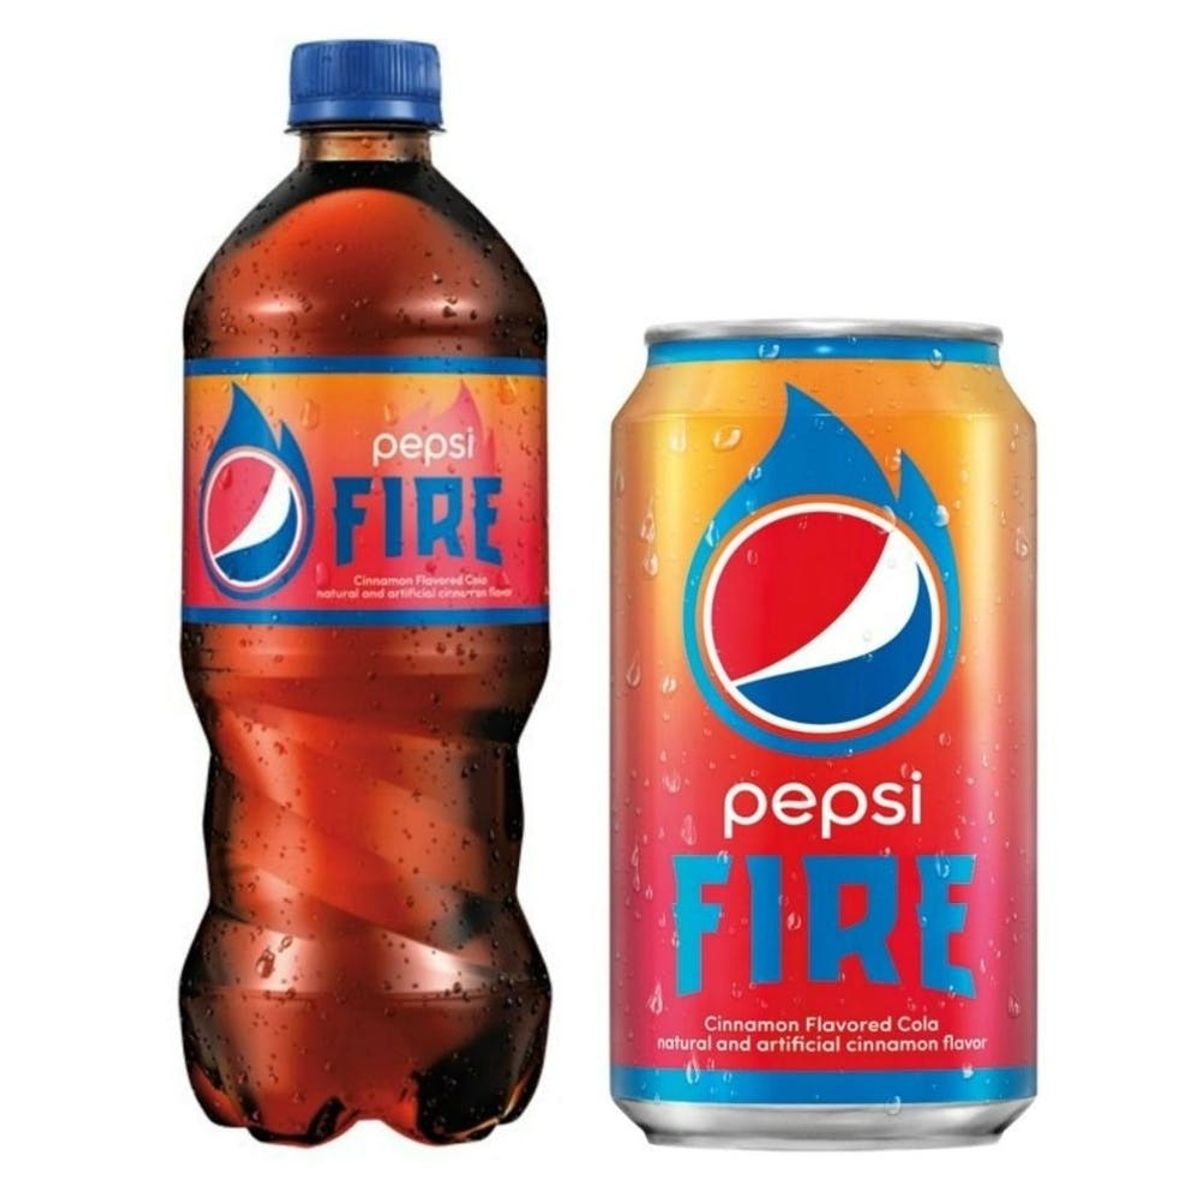 Cinnamon-Flavored Pepsi Fire Is the New Soft Drink We’re Not Sure We Want to Try